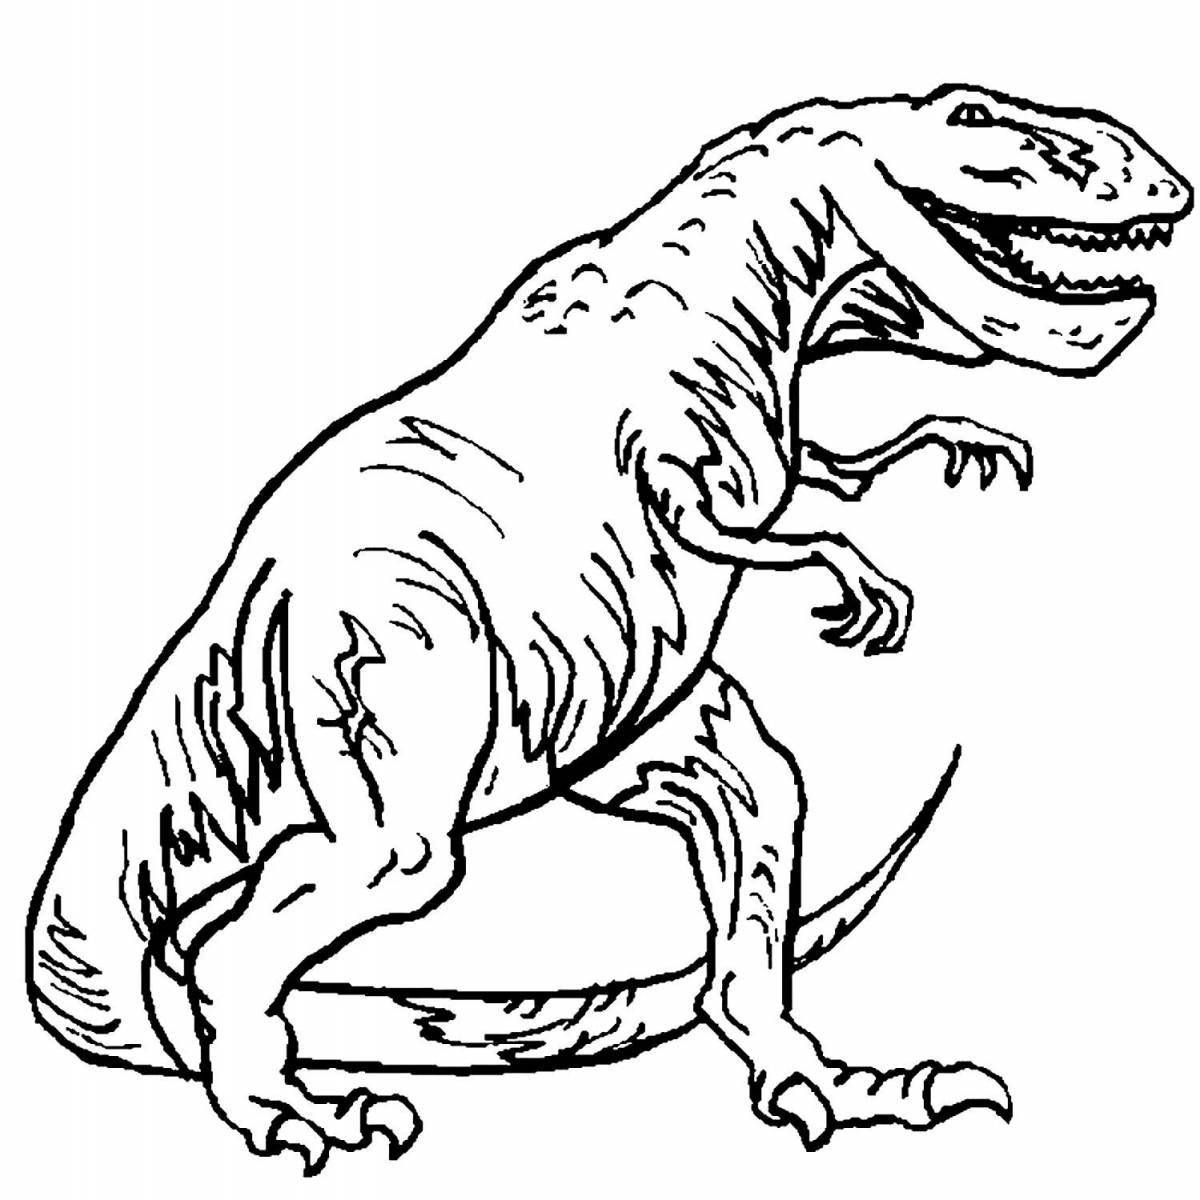 Colorful tyrannosaurus coloring pages for kids